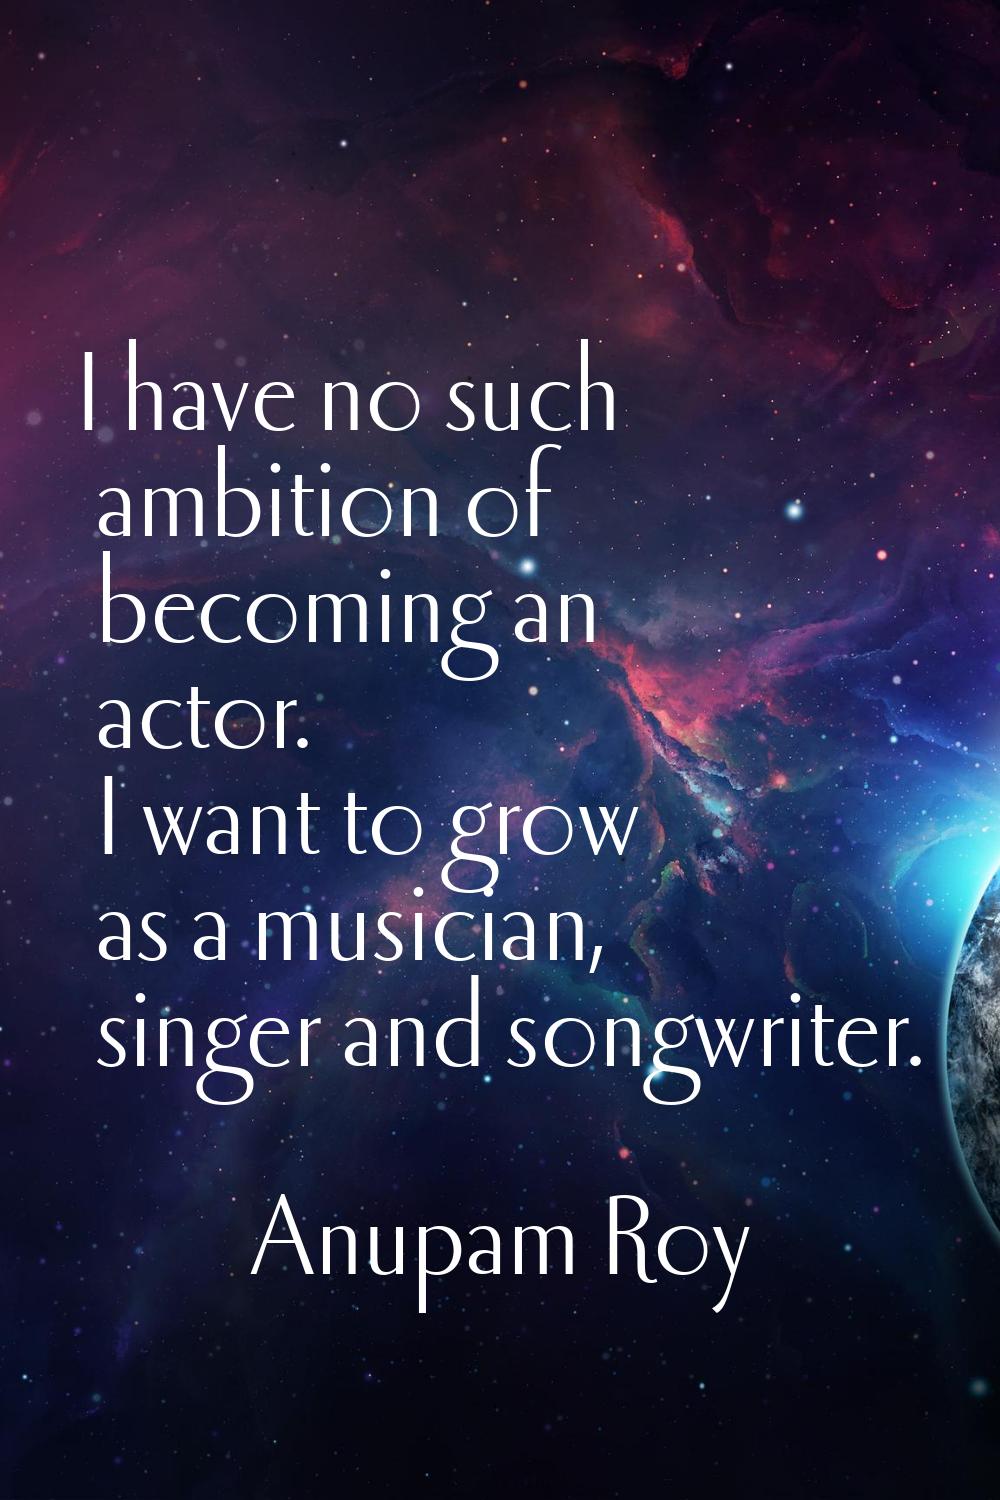 I have no such ambition of becoming an actor. I want to grow as a musician, singer and songwriter.